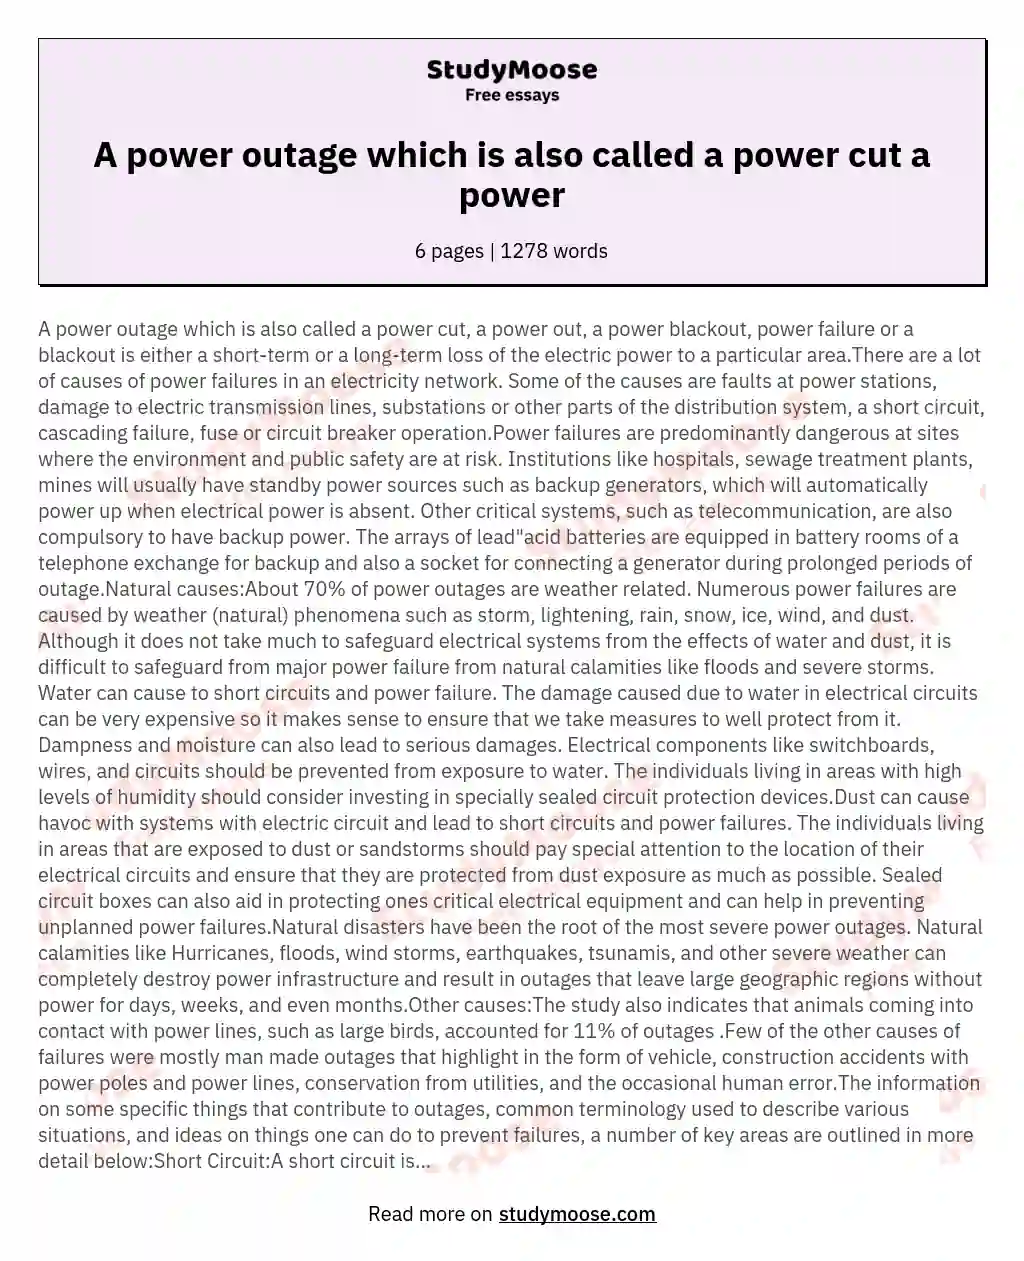 A power outage which is also called a power cut a power